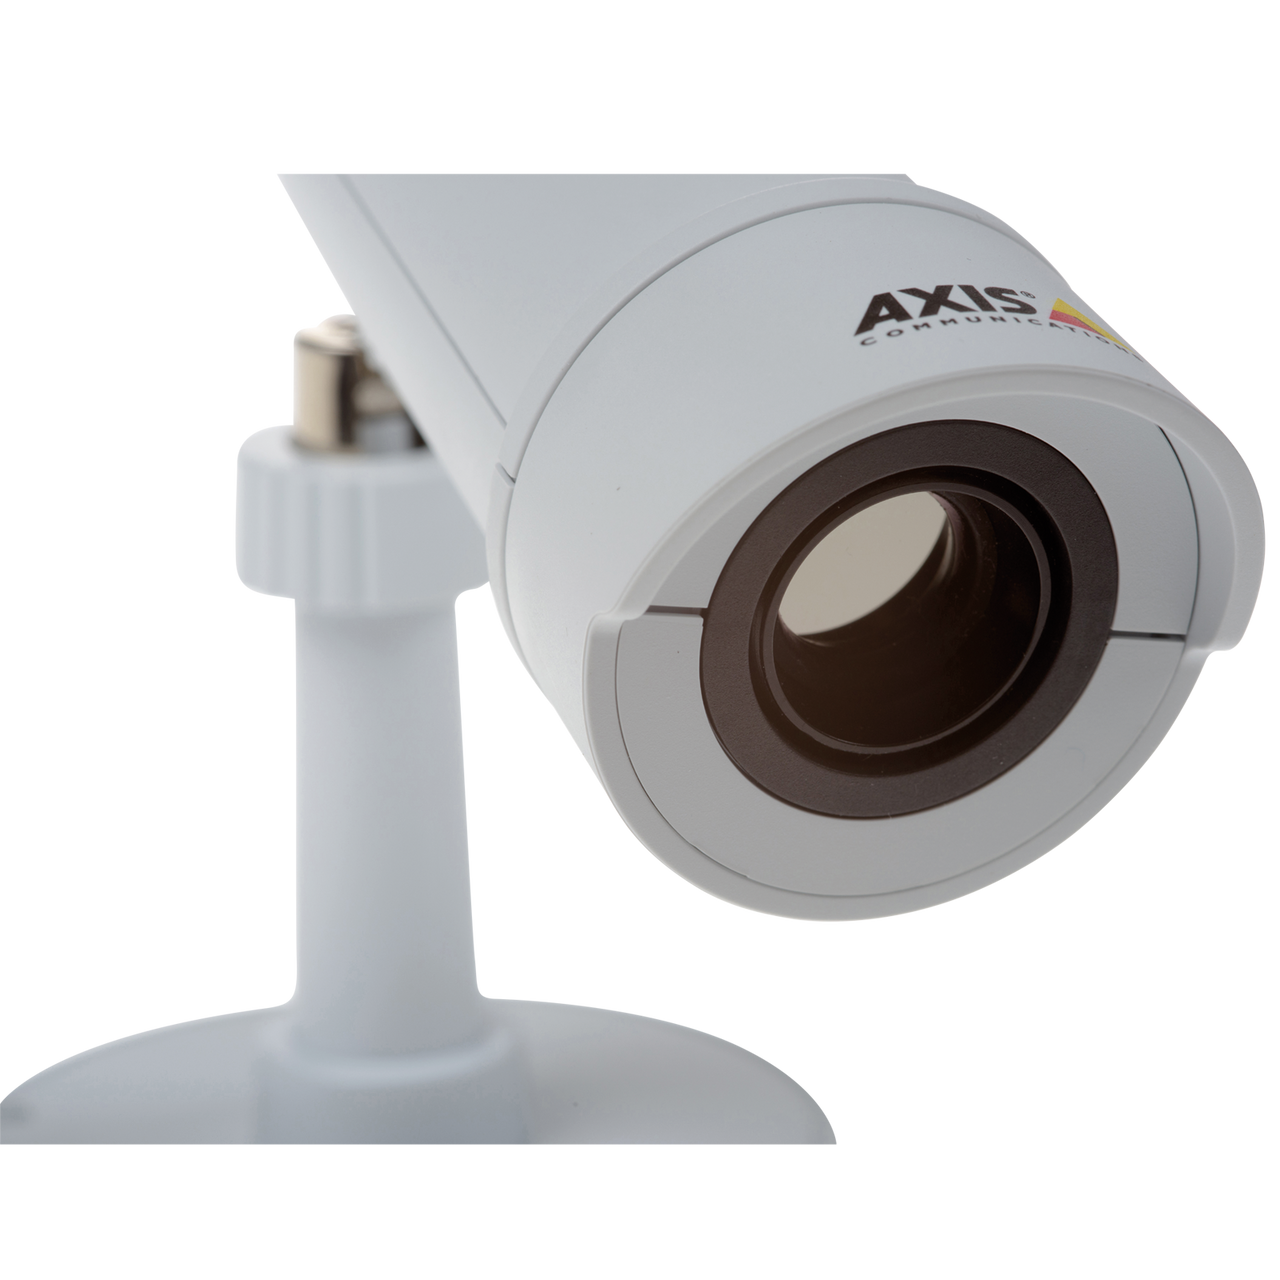 AXIS P1280-E 2.2 MM 8.3 FPS Discreet, thermal detection both indoor and outdoor